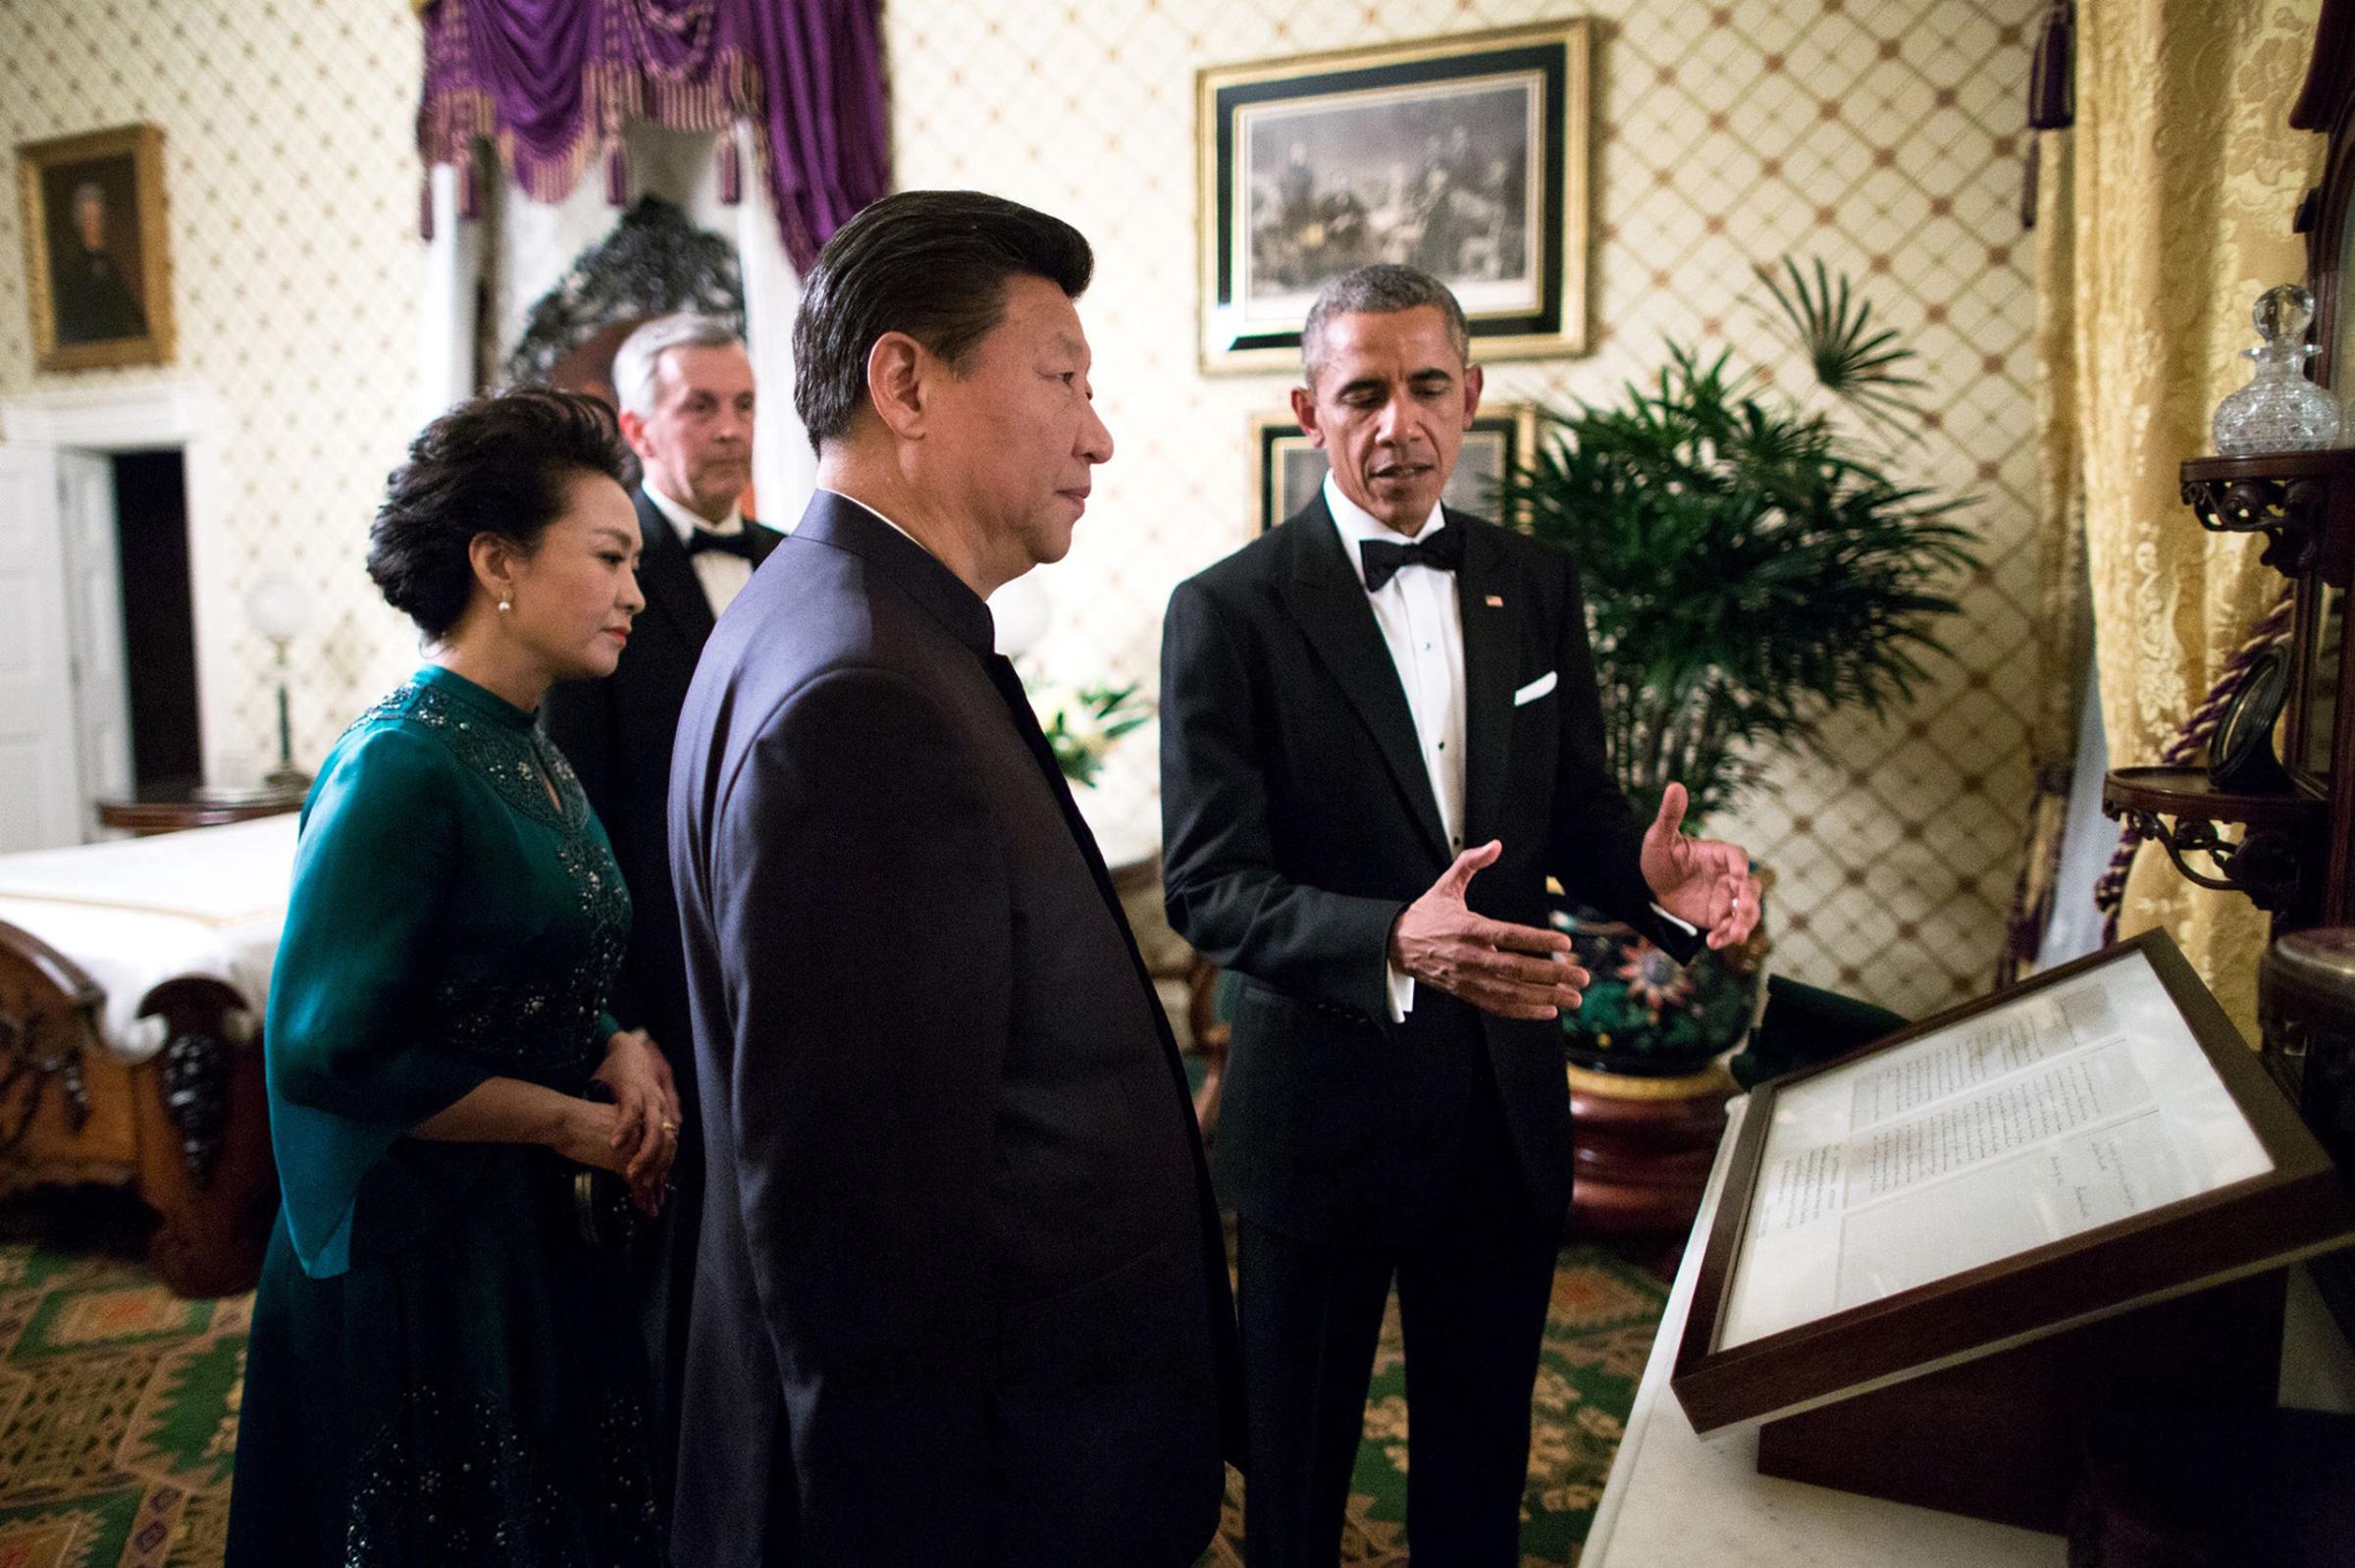 "Two days after the visit of Pope Francis, the President and First Lady hosted President Xi Jinping of China and Madame Peng Liyuan for another State Visit. Before the formal State Dinner, the President showed President Xi and Madame Peng the Gettysburg Address in the Lincoln Bedroom,"Sept. 25, 2015.